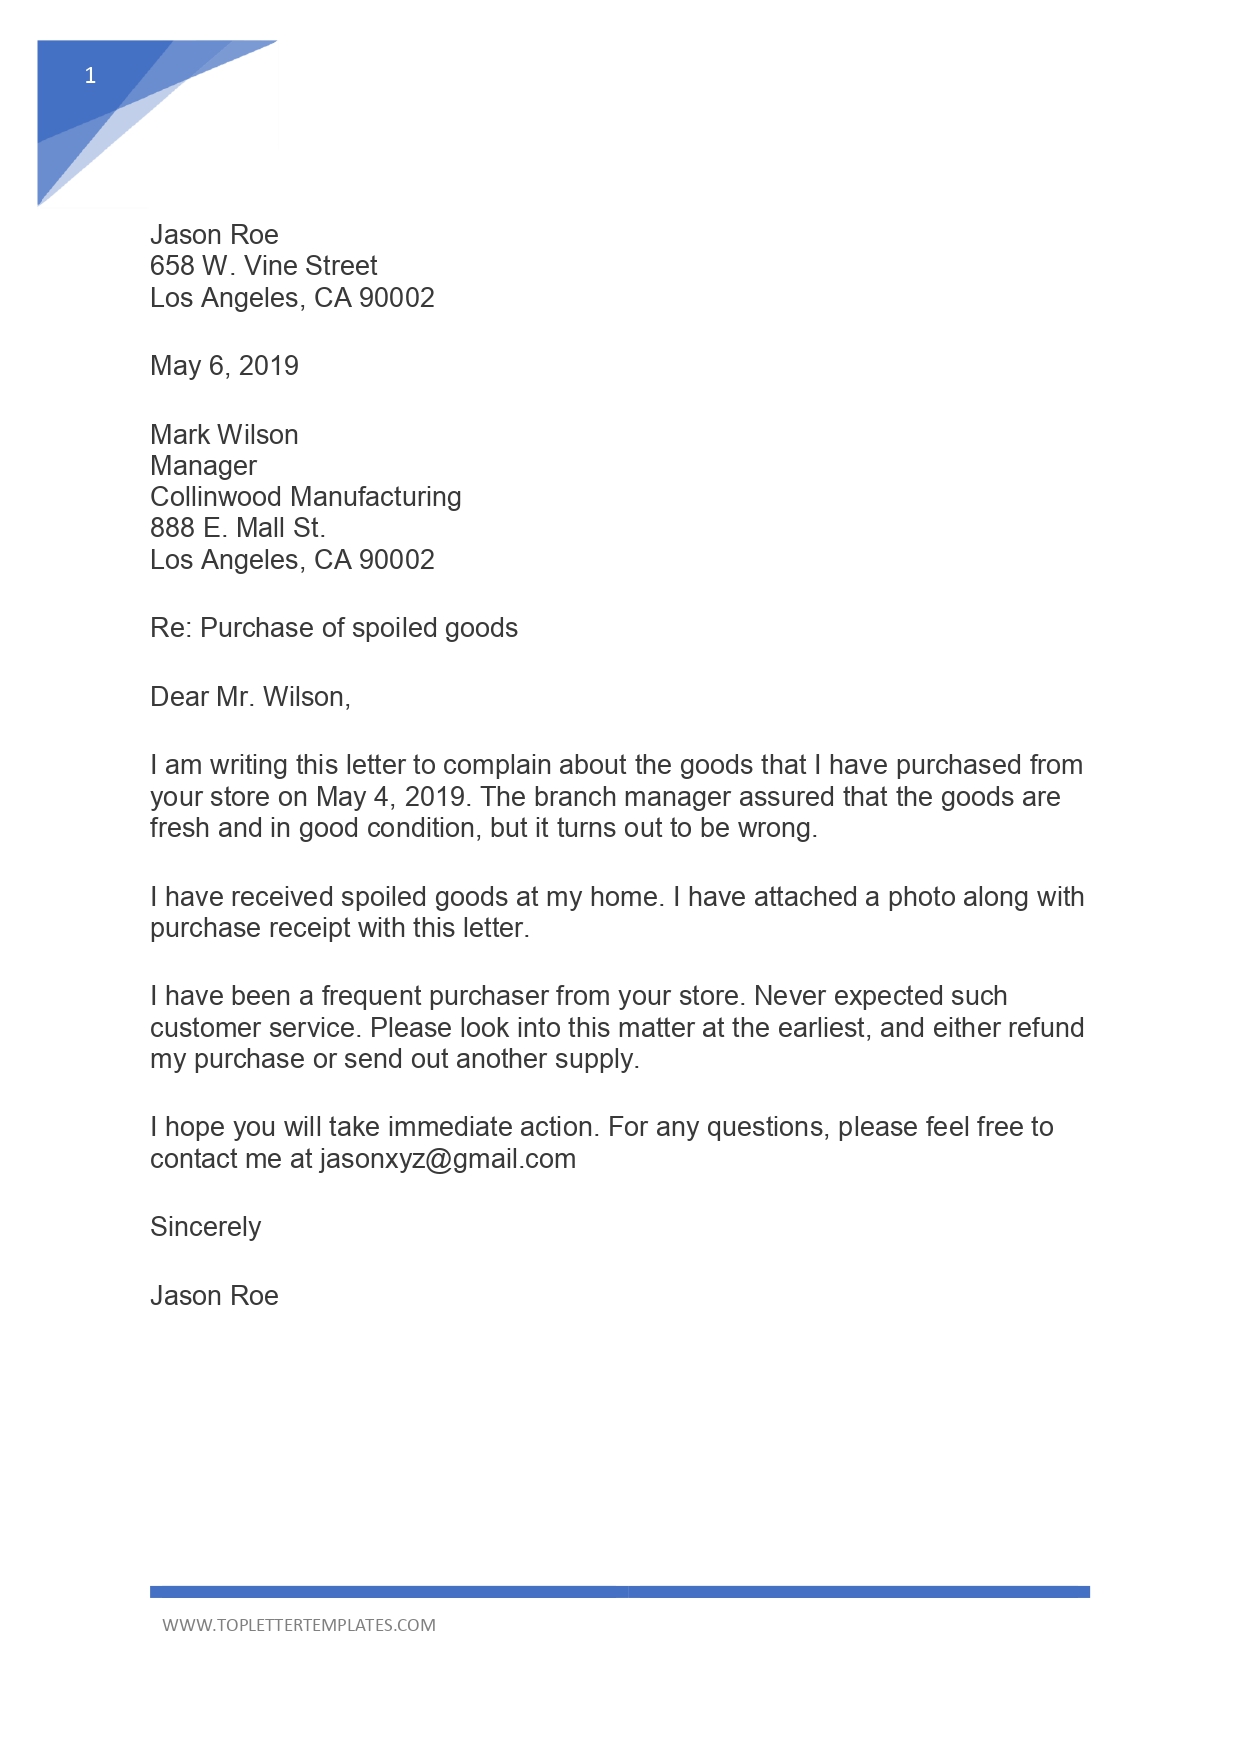 Sample Complaint Letter Example for Bad Product - Top ...